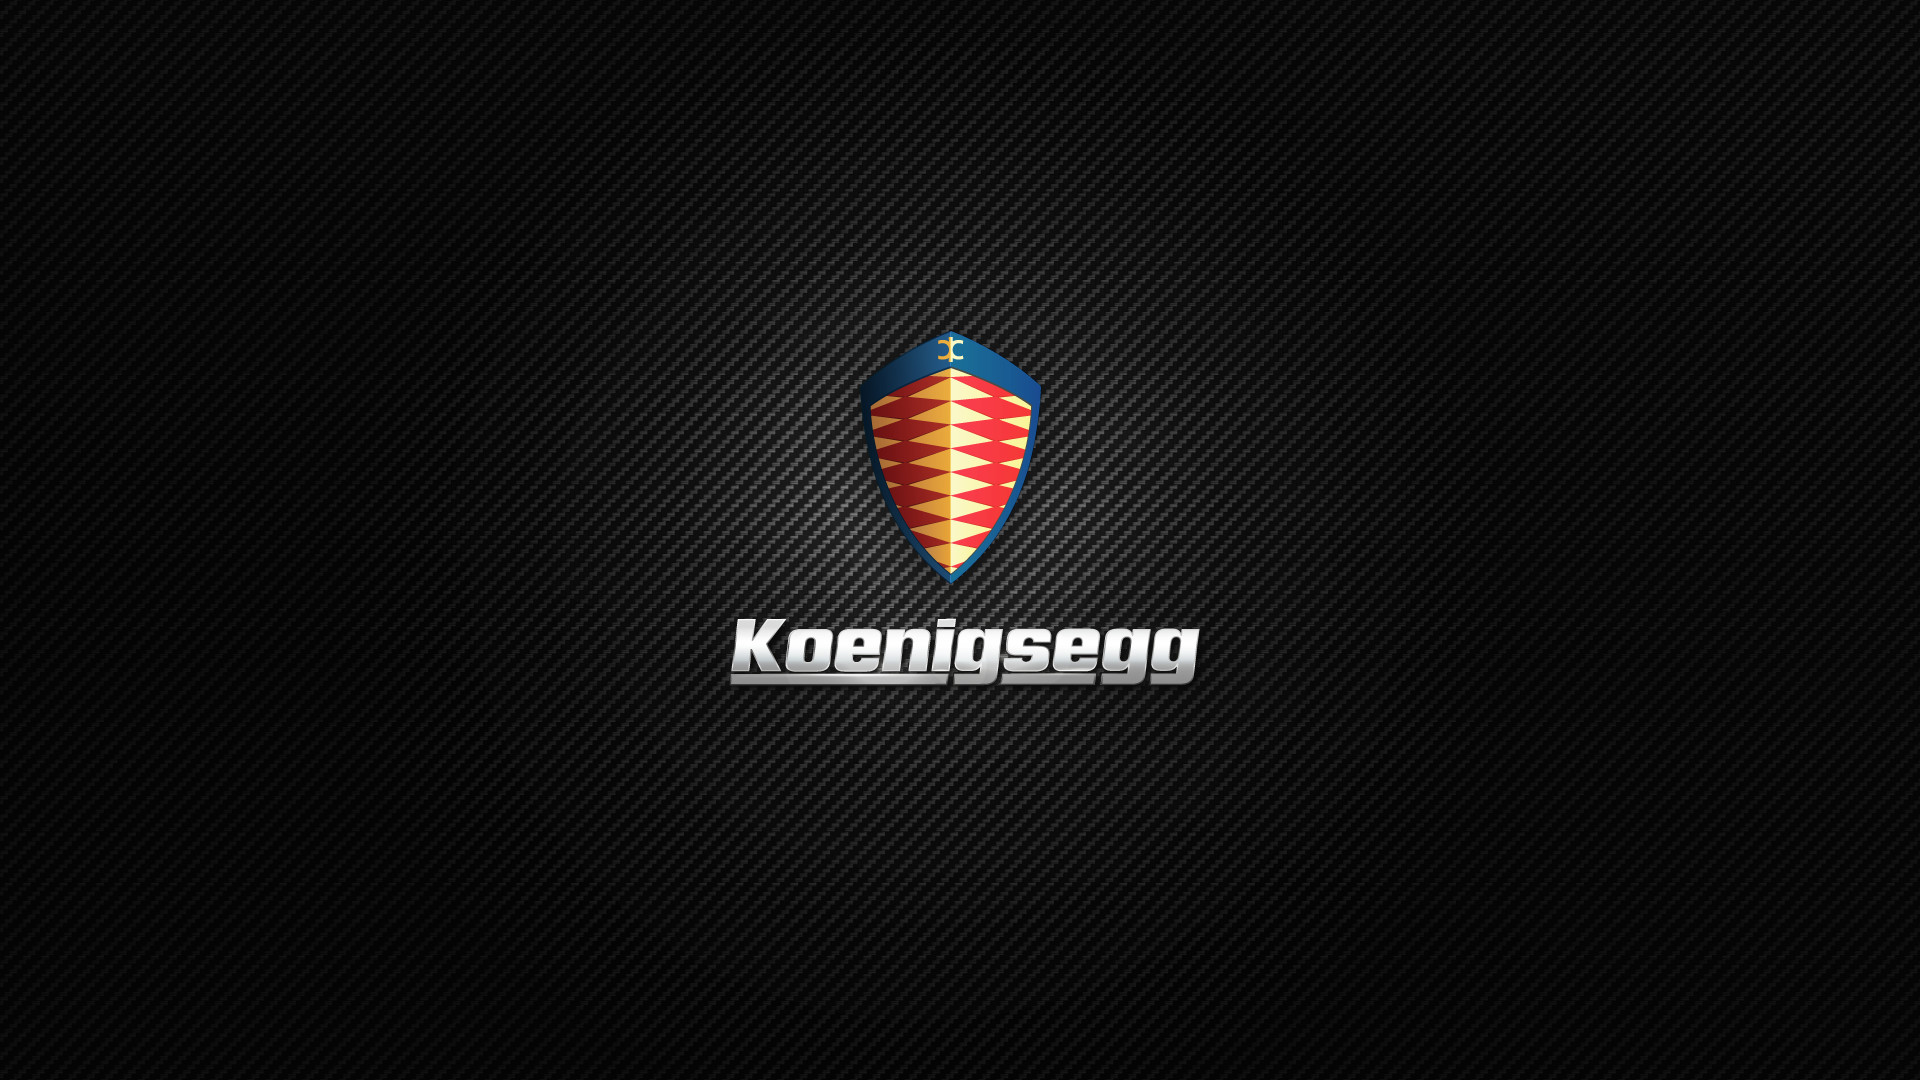 1920x1080 Download the following Koenigsegg Logo Wallpaper HD 41876 by clicking the  orange button positioned underneath the